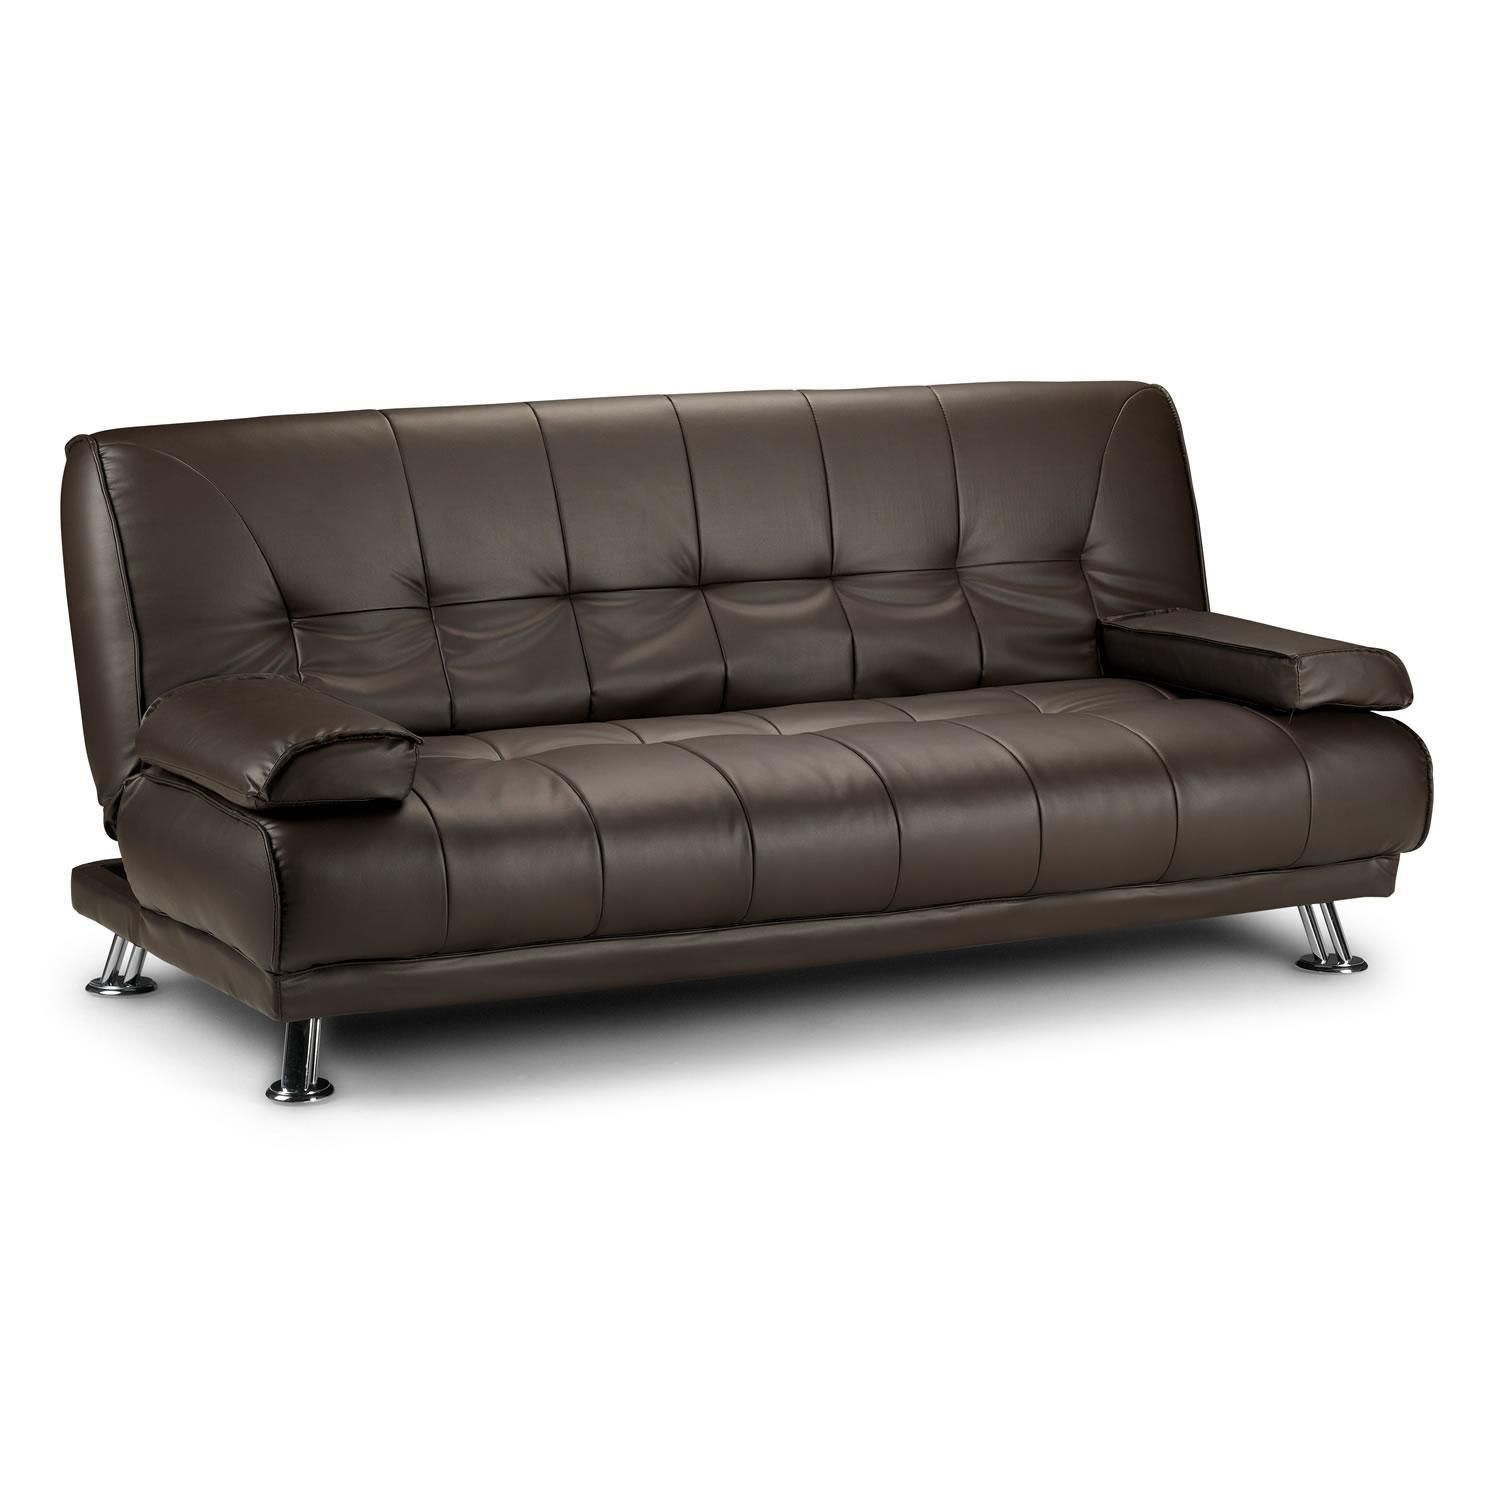 Futon Click Clack Sofa Bed Pertaining To Clic Clac Sofa Beds (View 12 of 20)